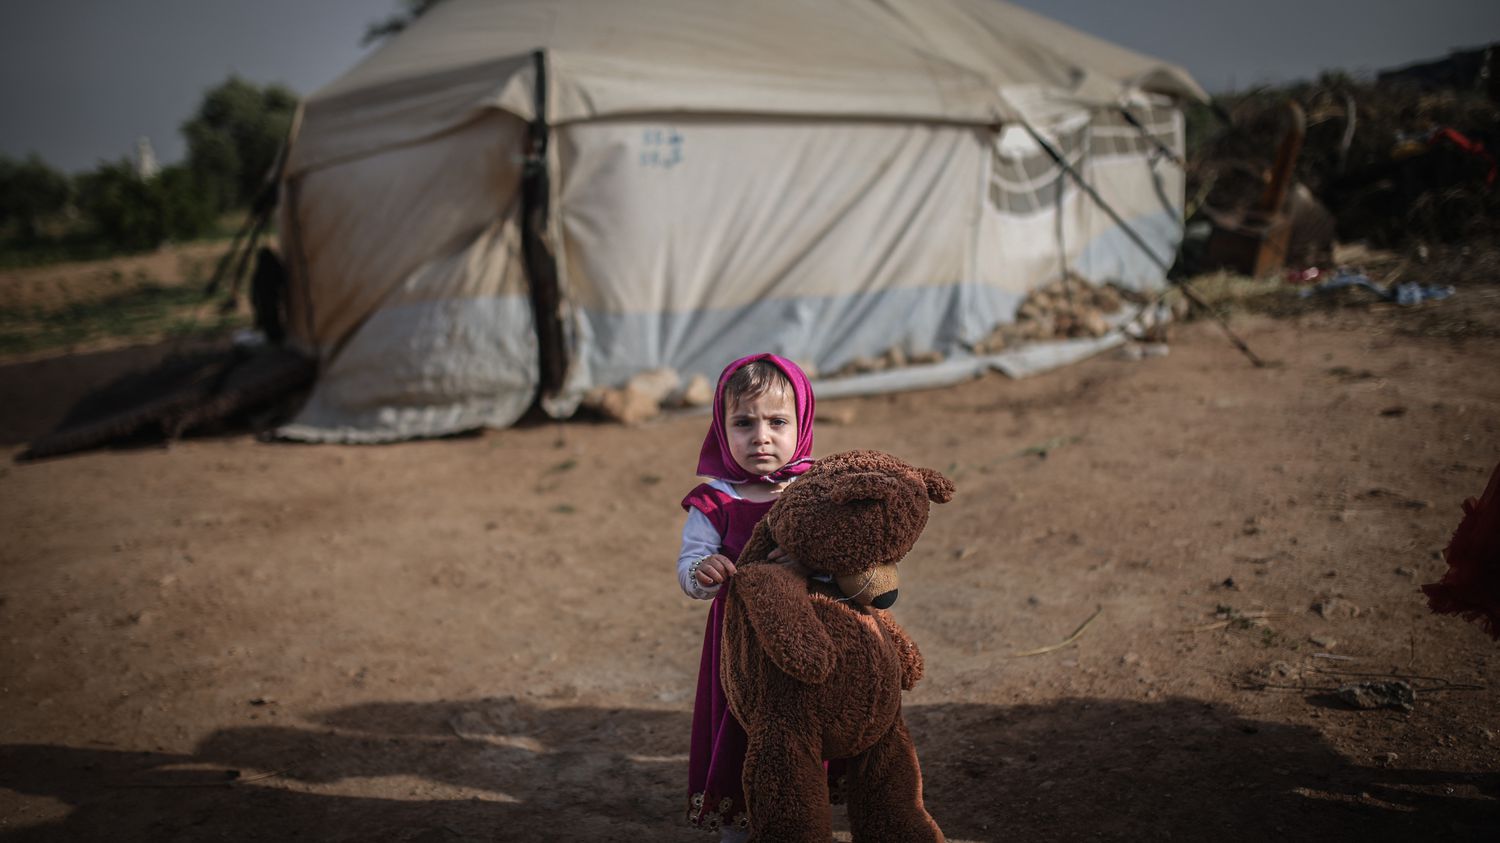 More than 12.3 million Syrian children need help, warns the UN
